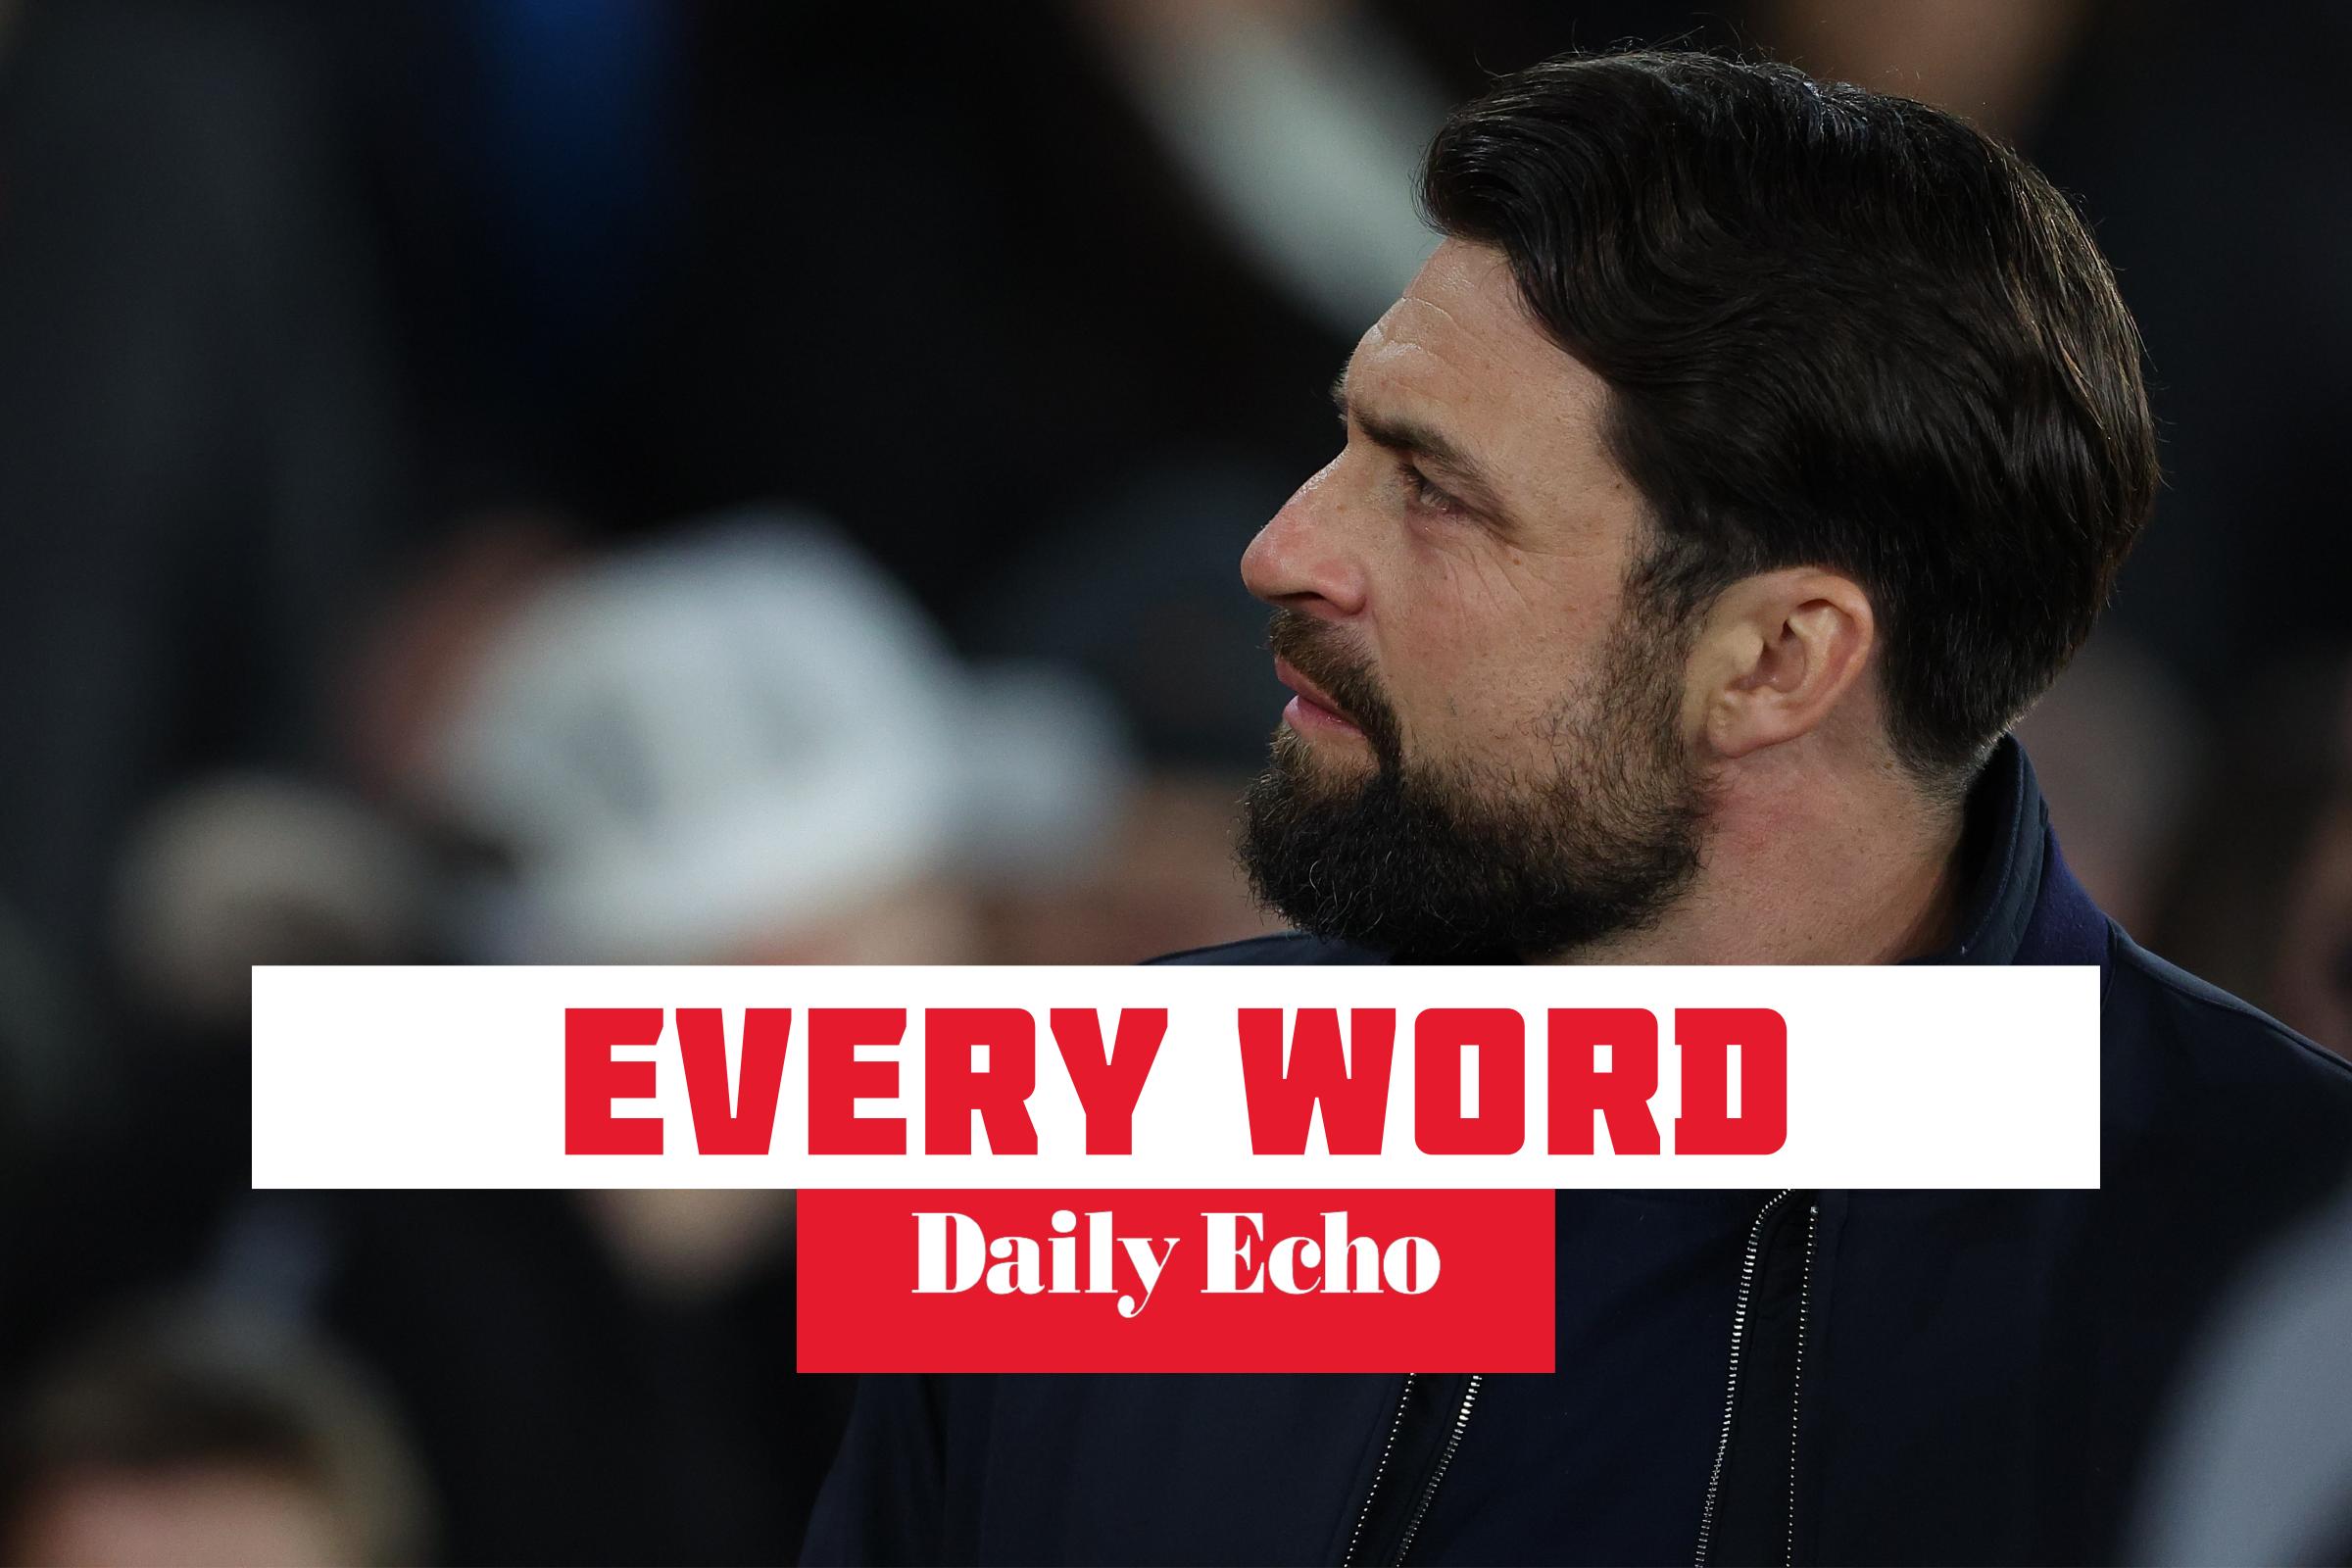 Every word Southampton manager Russell Martin said after Hull City